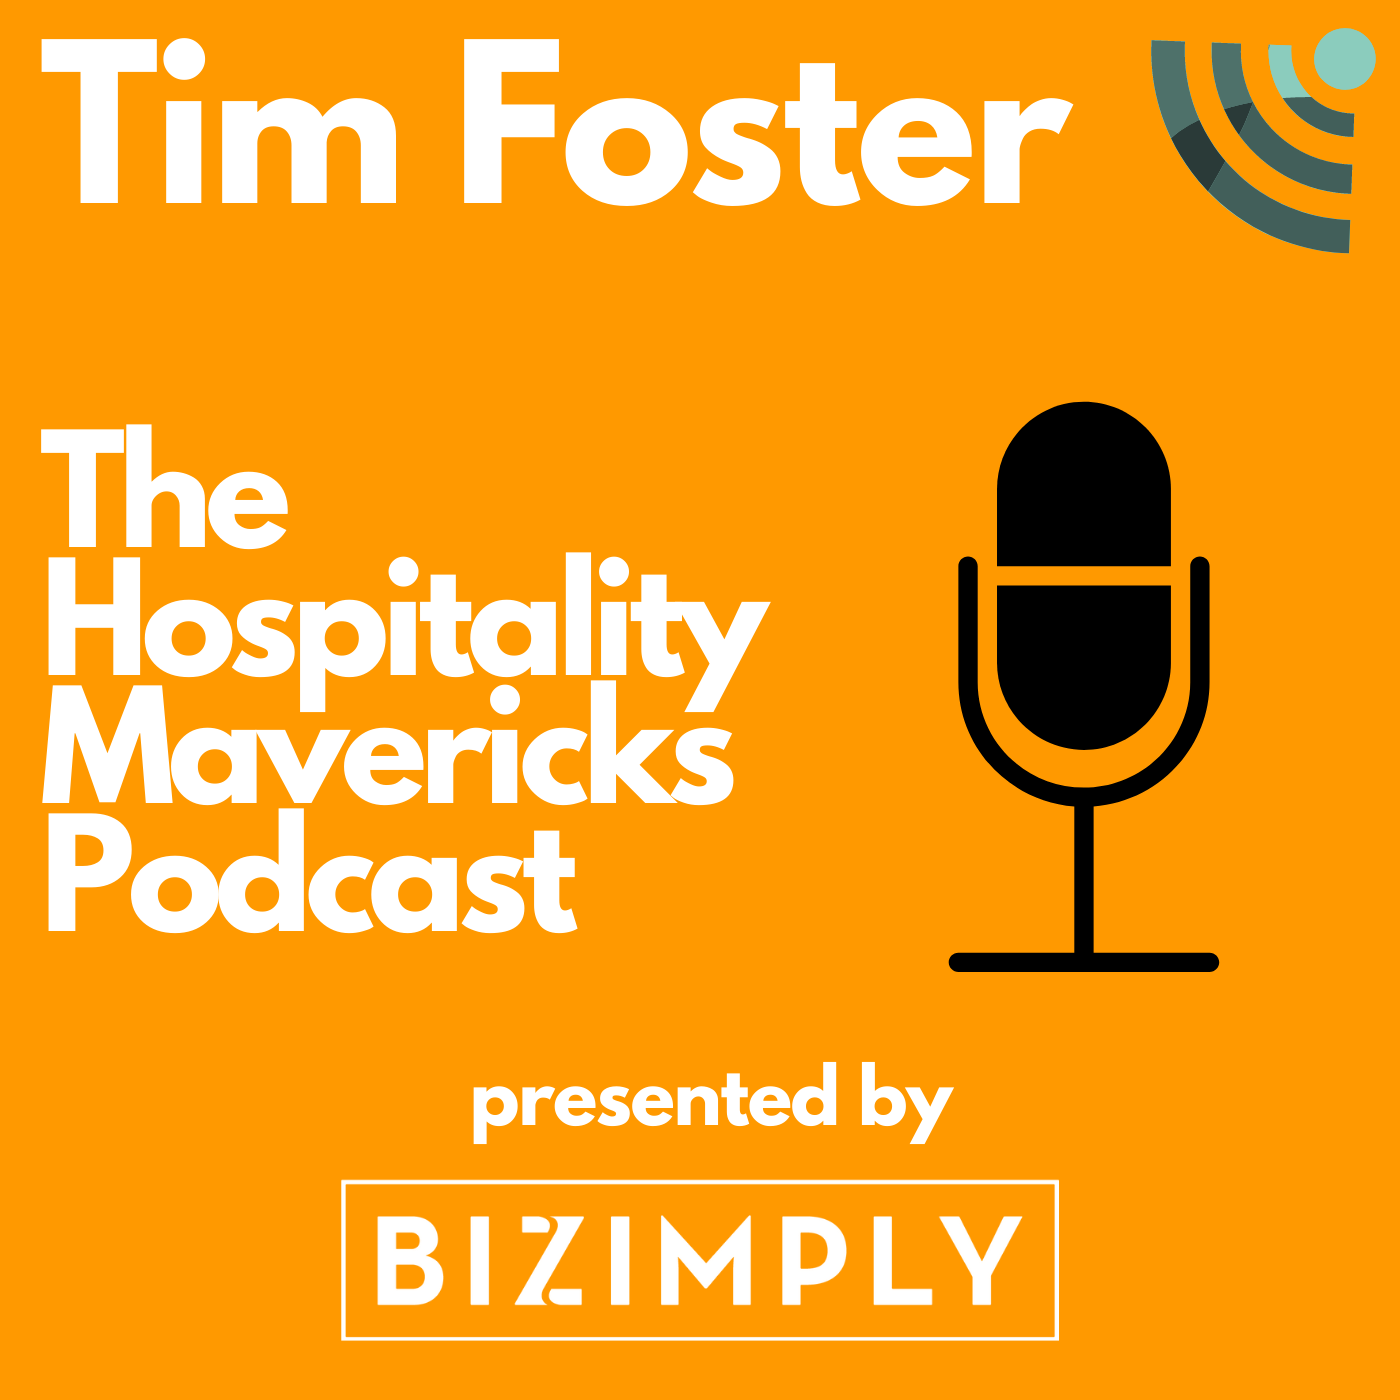 #116 Tim Foster, Head of Being Awesome at the Yummy Pub Co, on Honest Hospitality Image